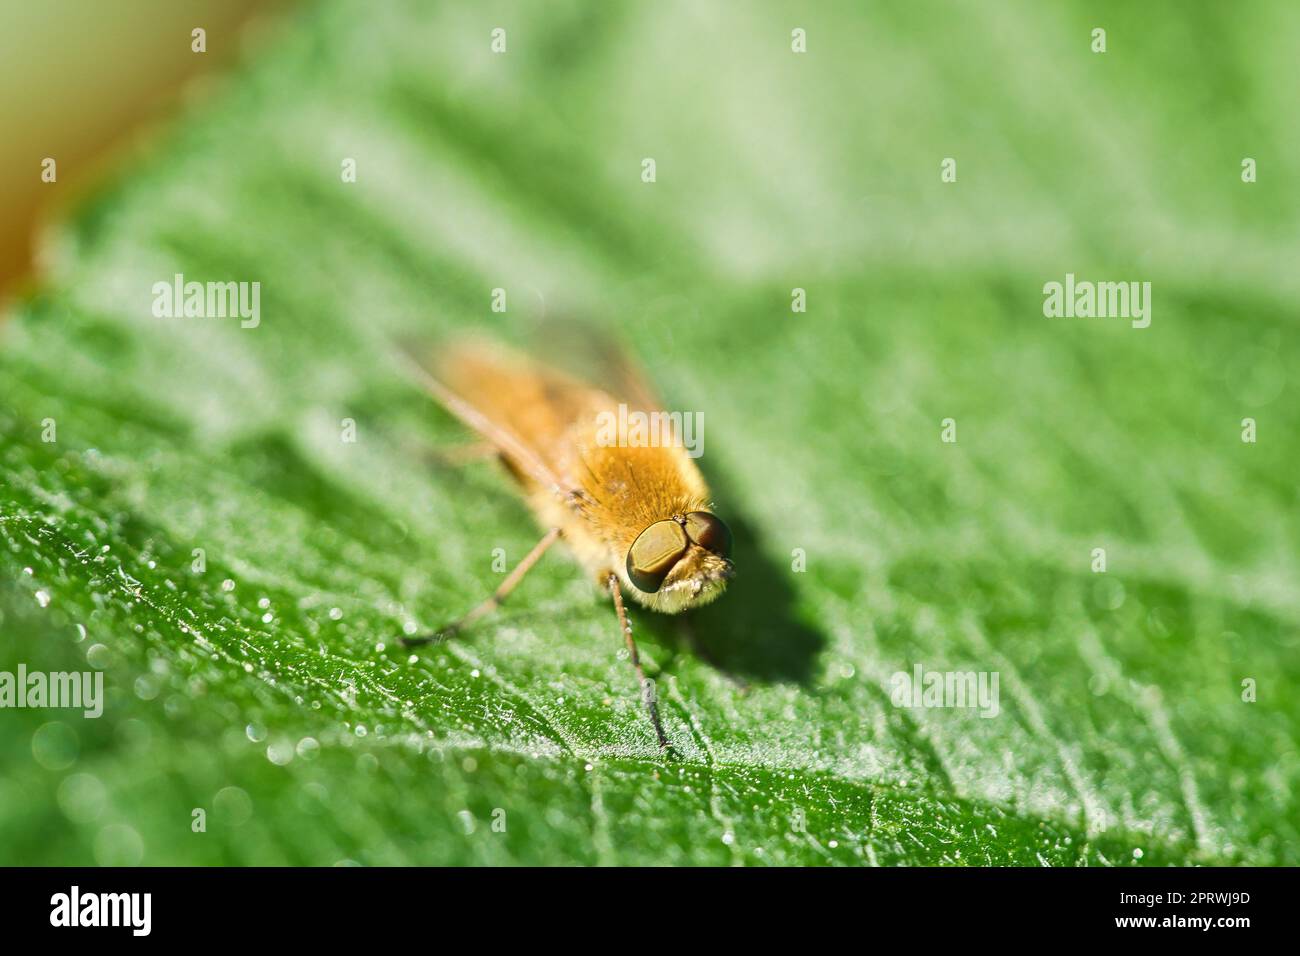 Hair rings fly on a green leaf. Sunshine on the insect. Macro shot Stock Photo